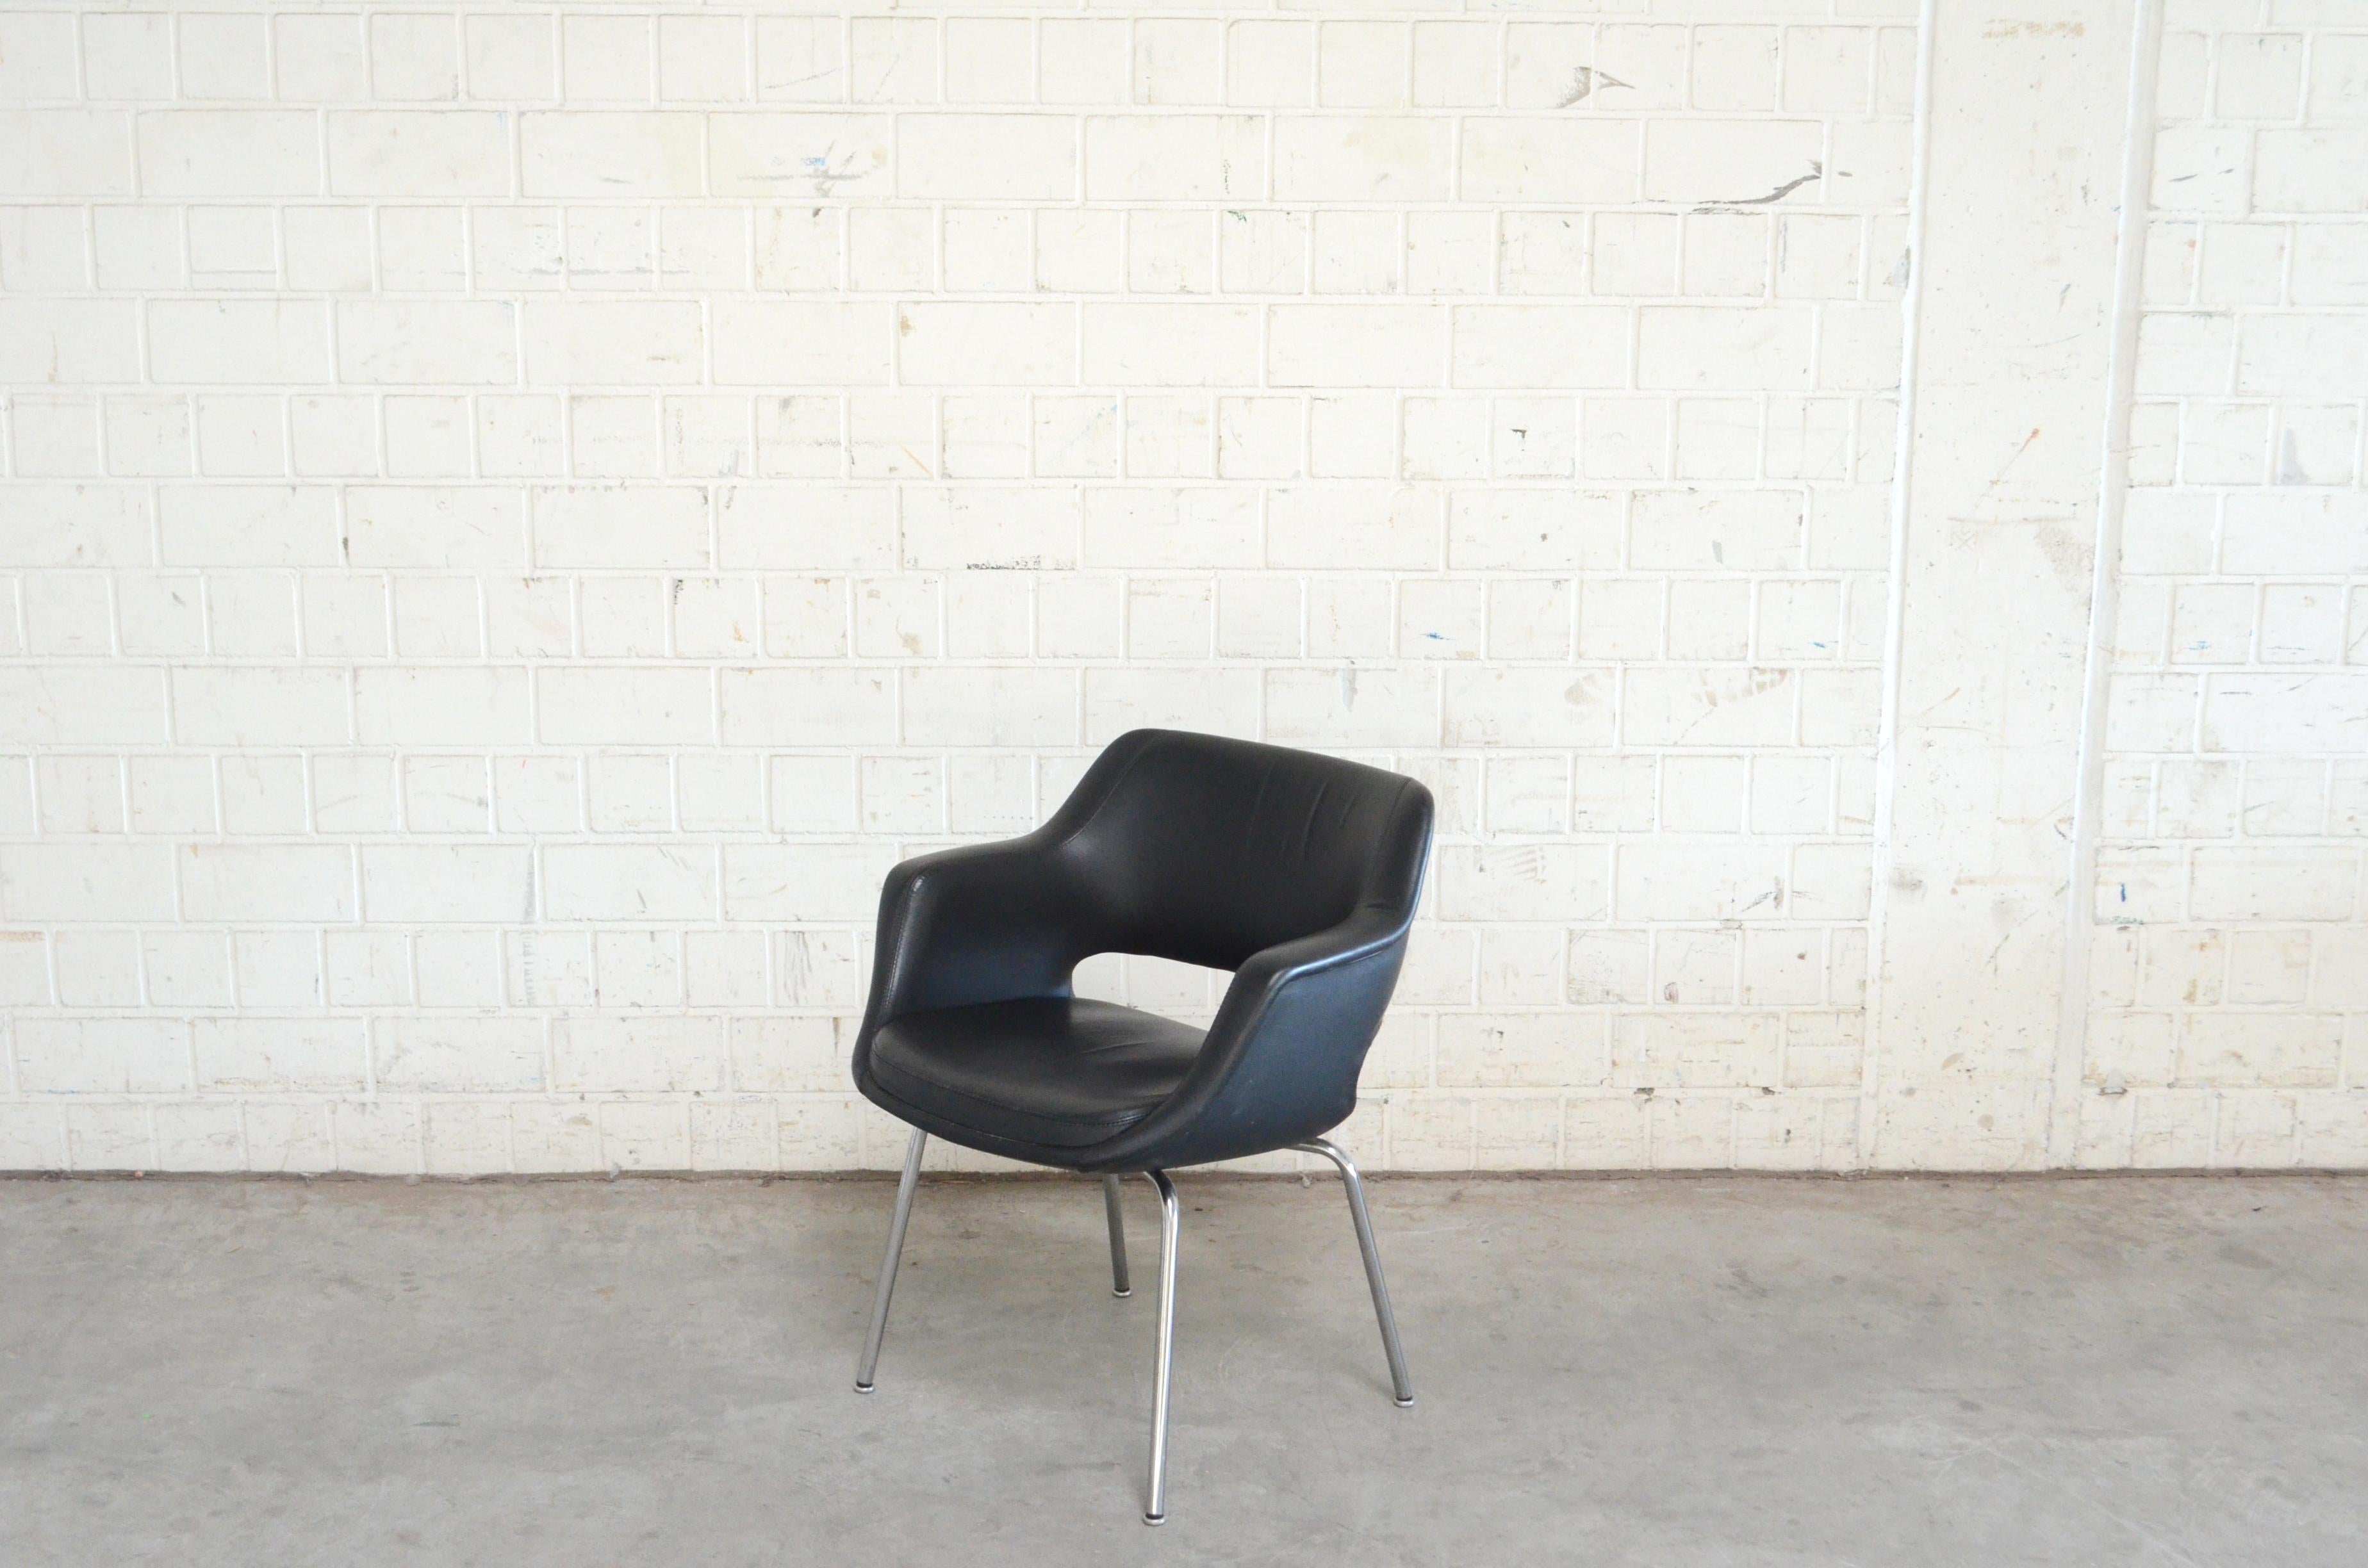 Olli Mannermaa Set of 4 Leather Kilta Chair by Eugen Schmidt & Cassina Martela In Good Condition For Sale In Munich, Bavaria